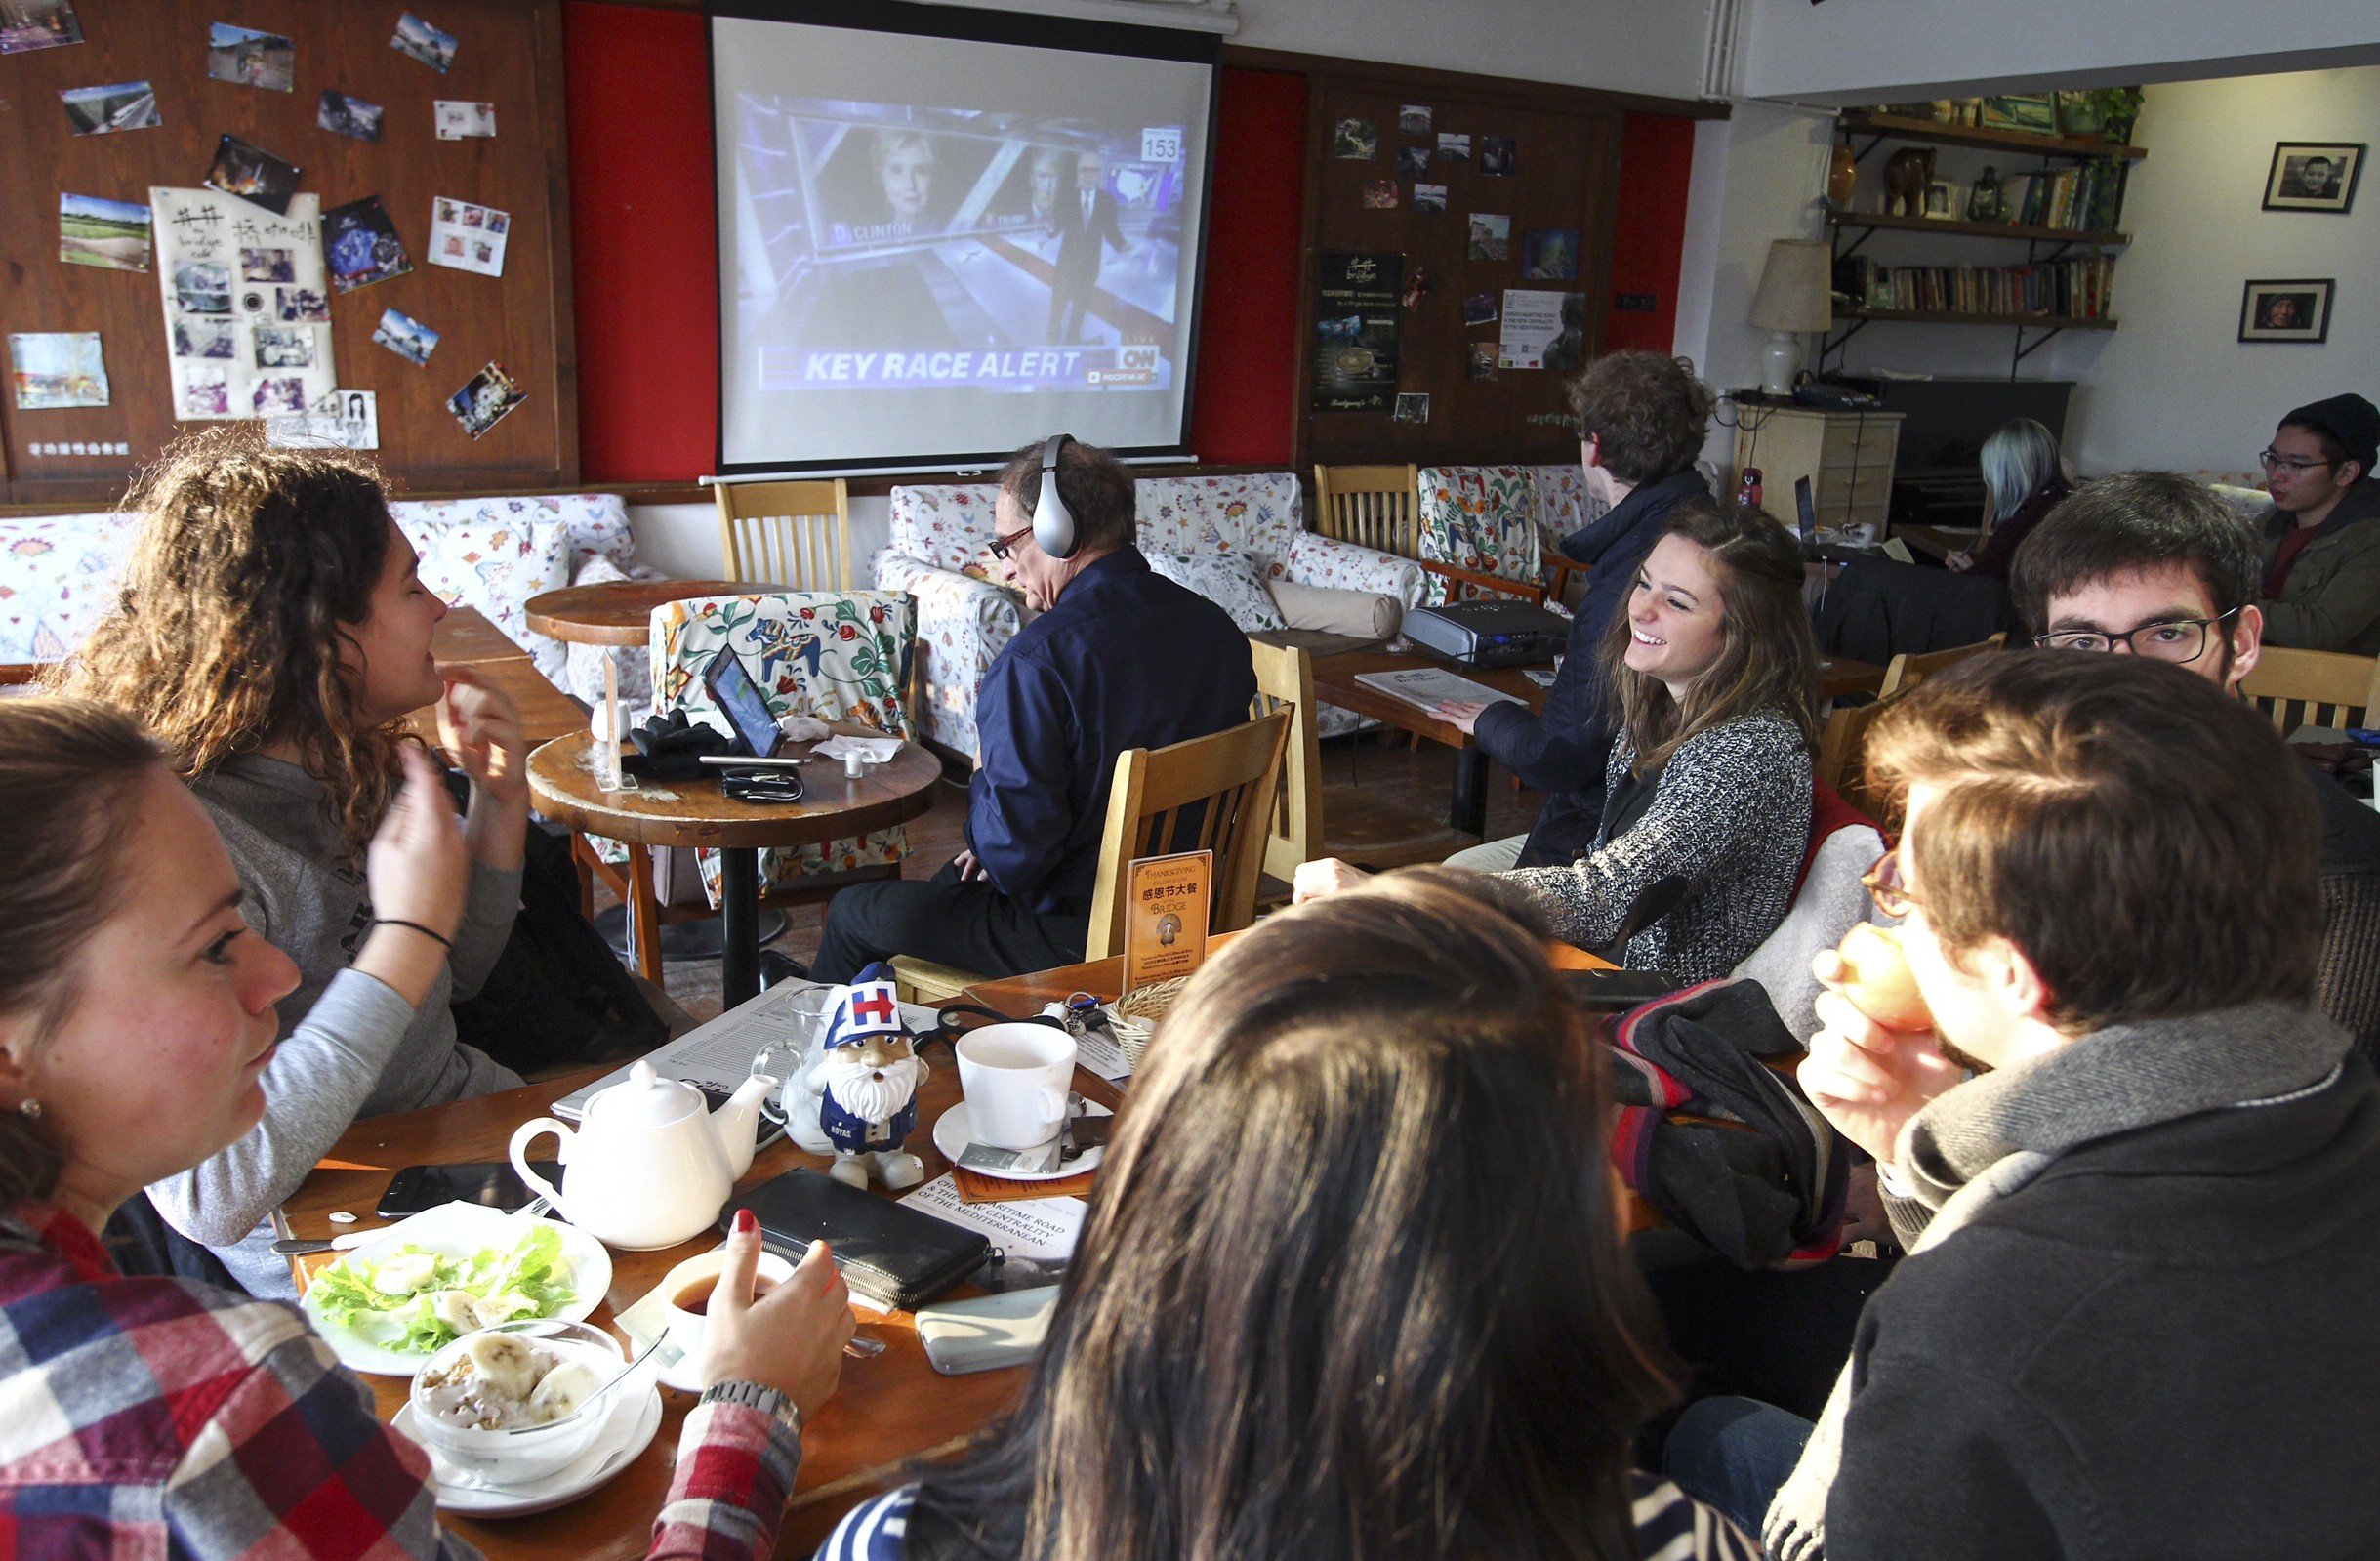 Foreigners watch a live broadcast of the US election at a cafe in Beijing in November 2016. Beijing recently banned foreigners gathering in groups of 10 or more at restaurants in its university district during China’s annual parliamentary meetings. Photo: Simon Song